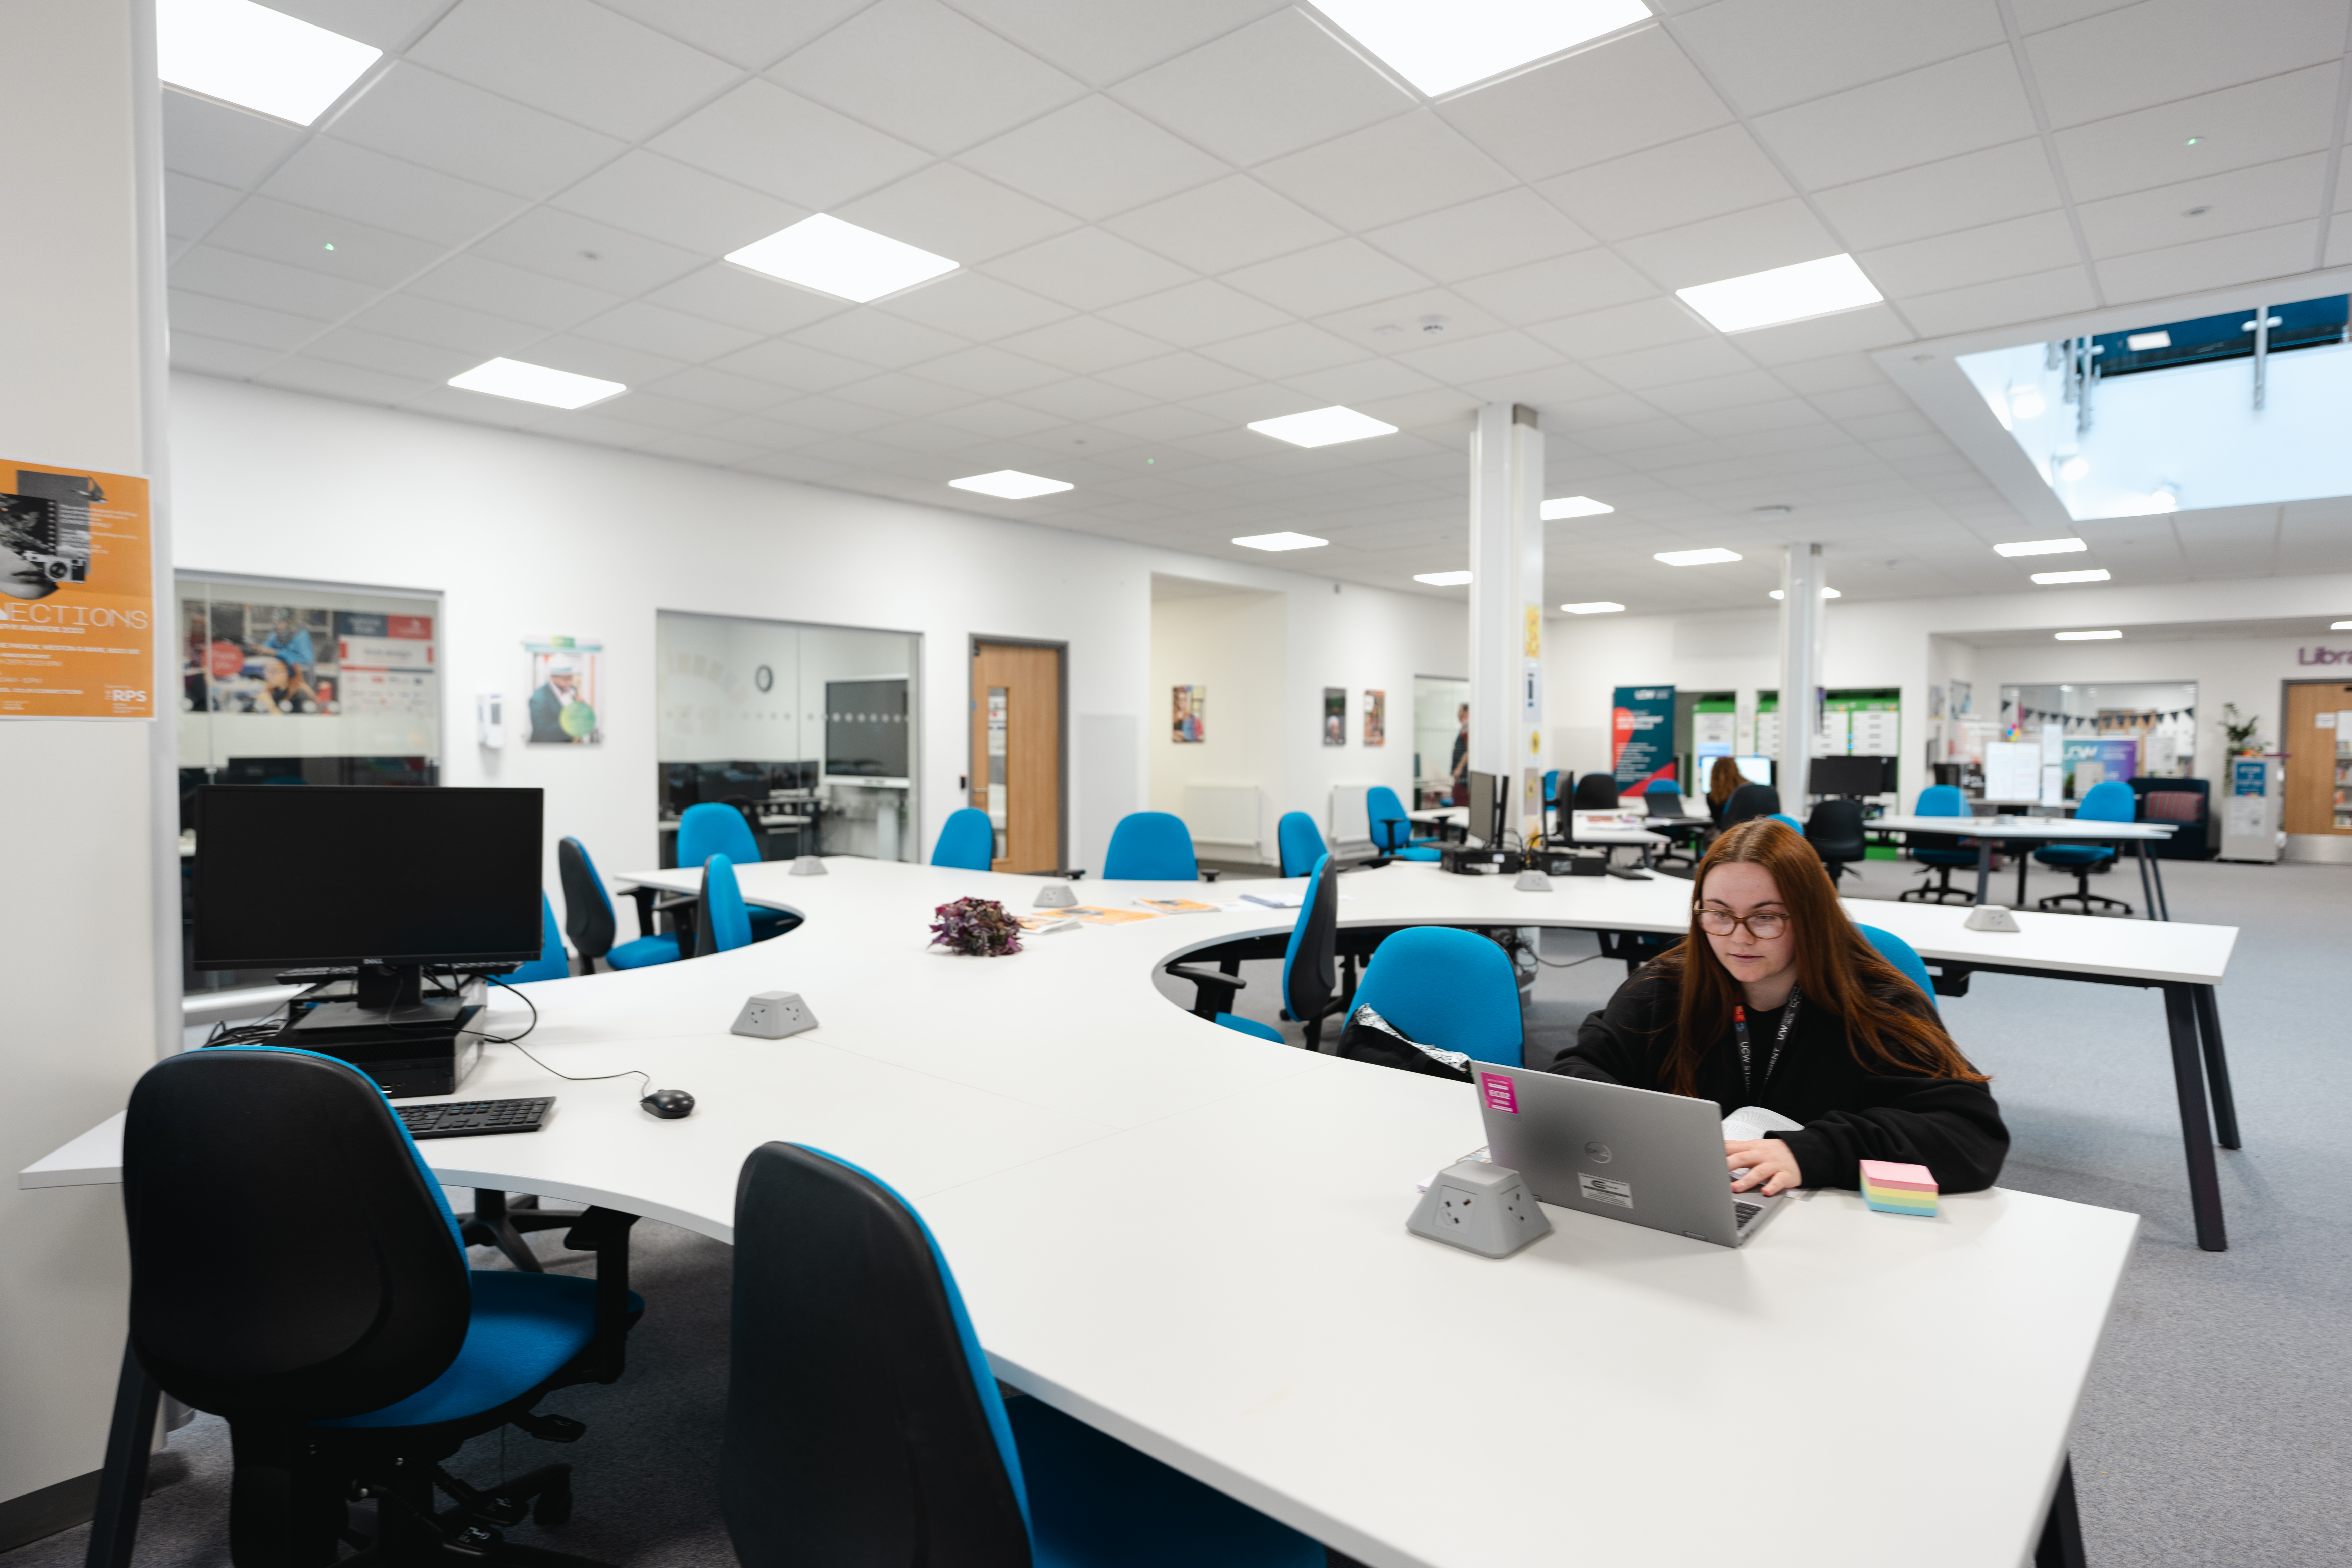 Open plan study space in The Winter Gardens Campus for University Centre Weston in Weston-super-Mare